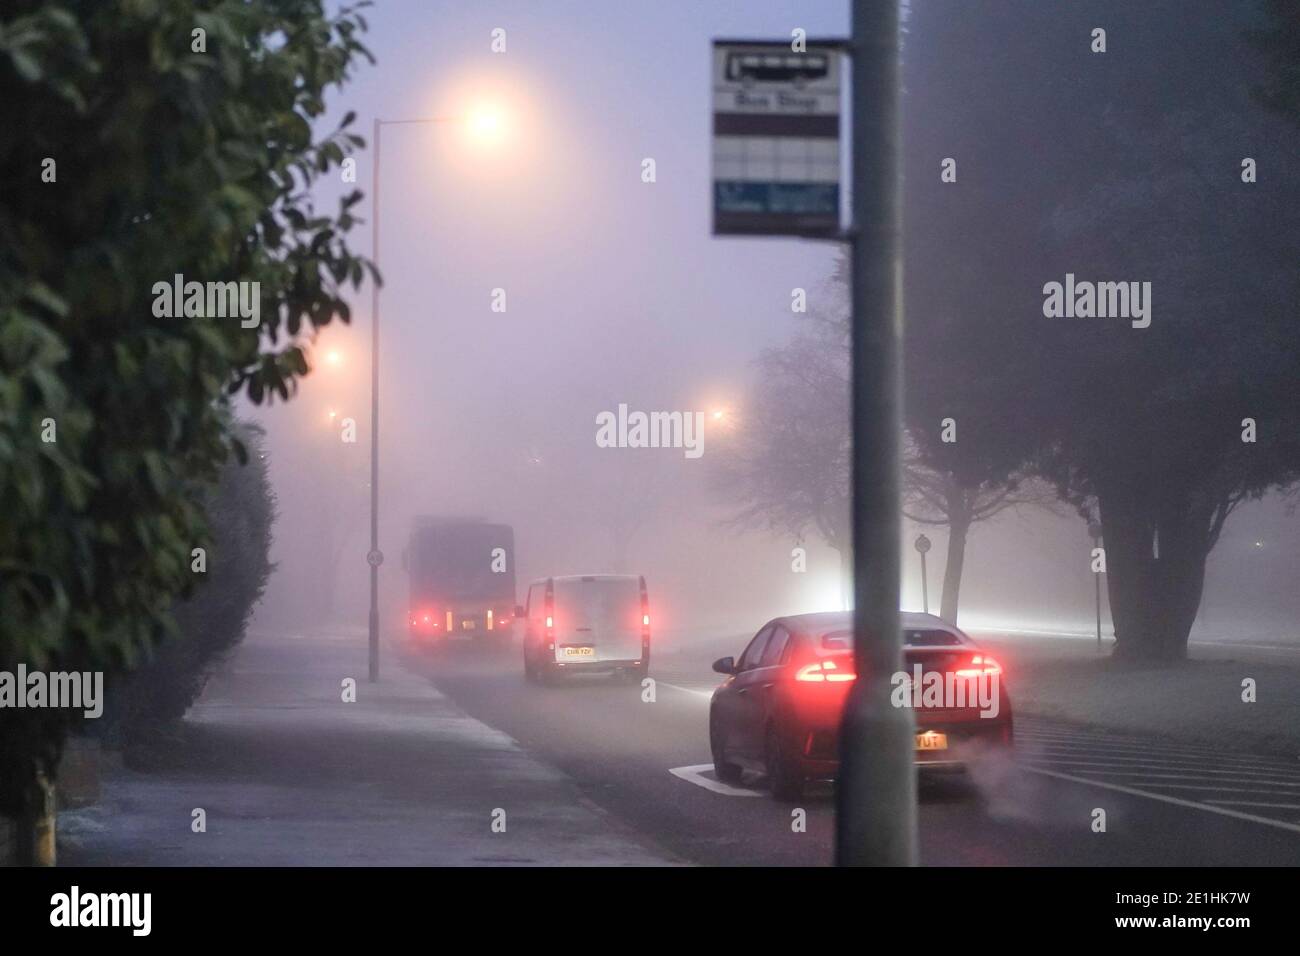 Kidderminster, UK. 7th January, 2021. UK weather: heavy fog and freezing temperatures makes travel very unnerving for motorists this morning with treacherous road conditions. Credit: Lee Hudson/Alamy Live News Stock Photo